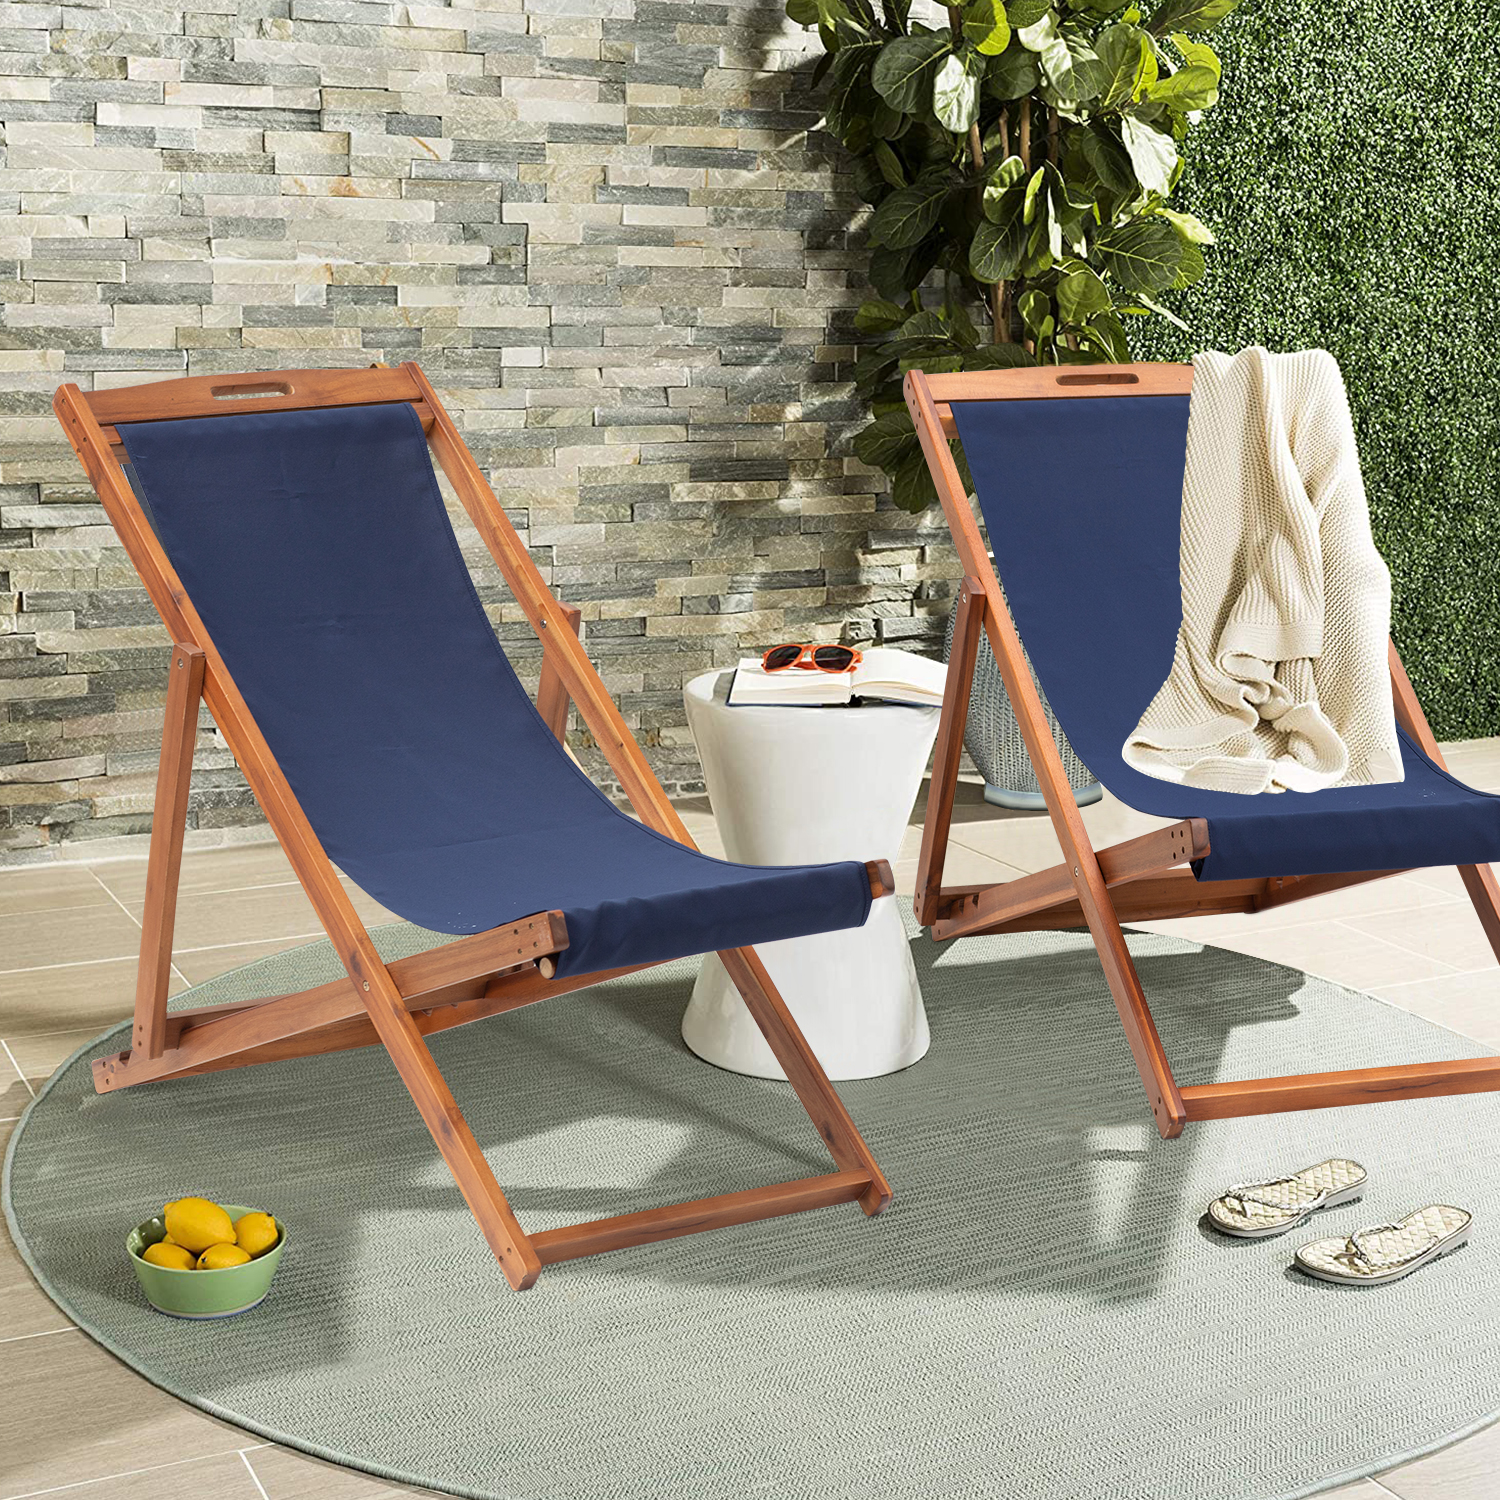 Beach Sling Chair Set of 2,  Adjustable Reclining Beach Chair  Outdoor Foldable Lounge Chairs for Garden, Backyard, Poolside, Balcony (Blue) - image 5 of 7